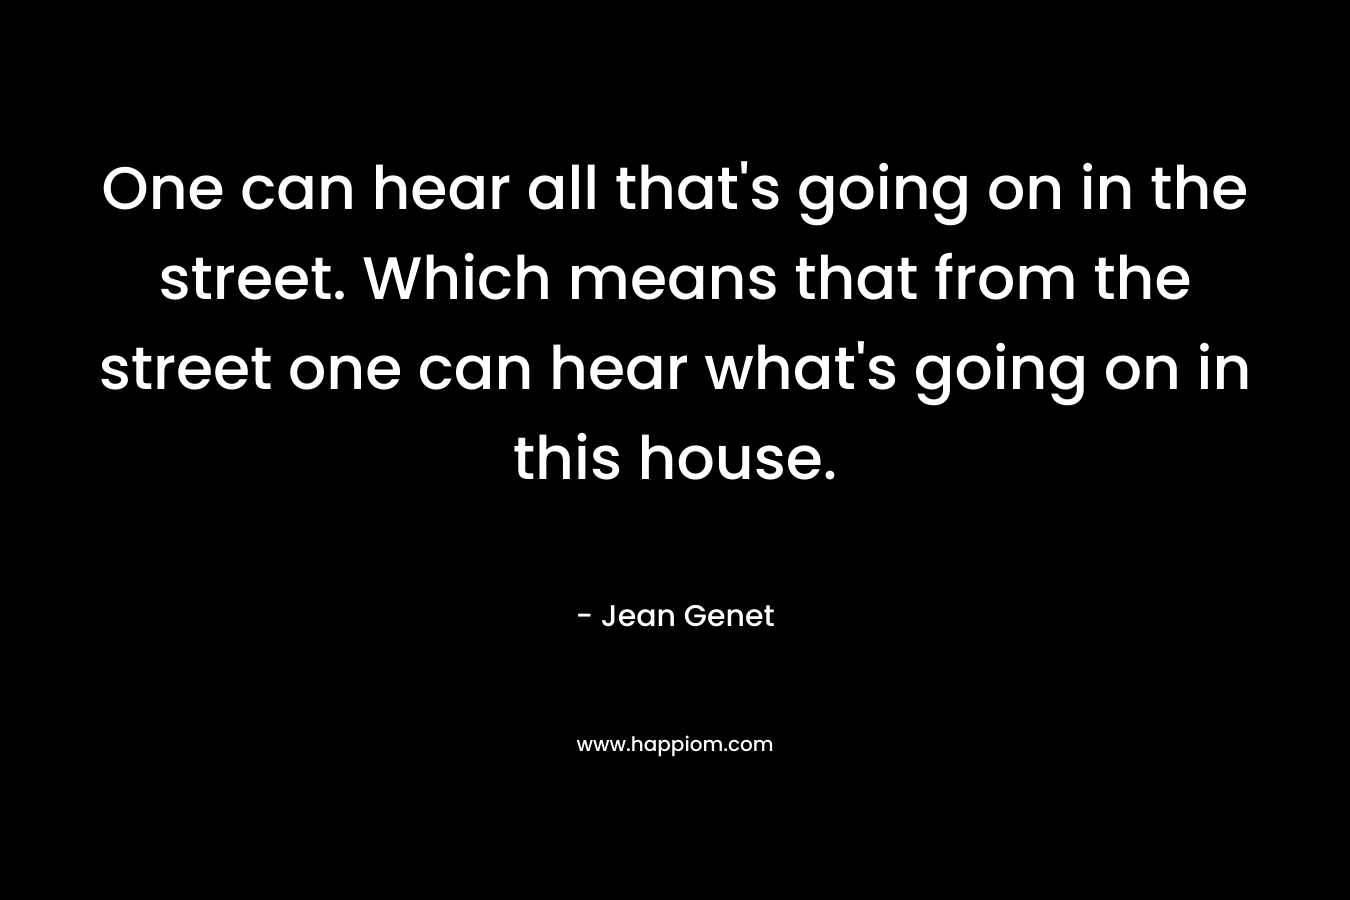 One can hear all that’s going on in the street. Which means that from the street one can hear what’s going on in this house. – Jean Genet